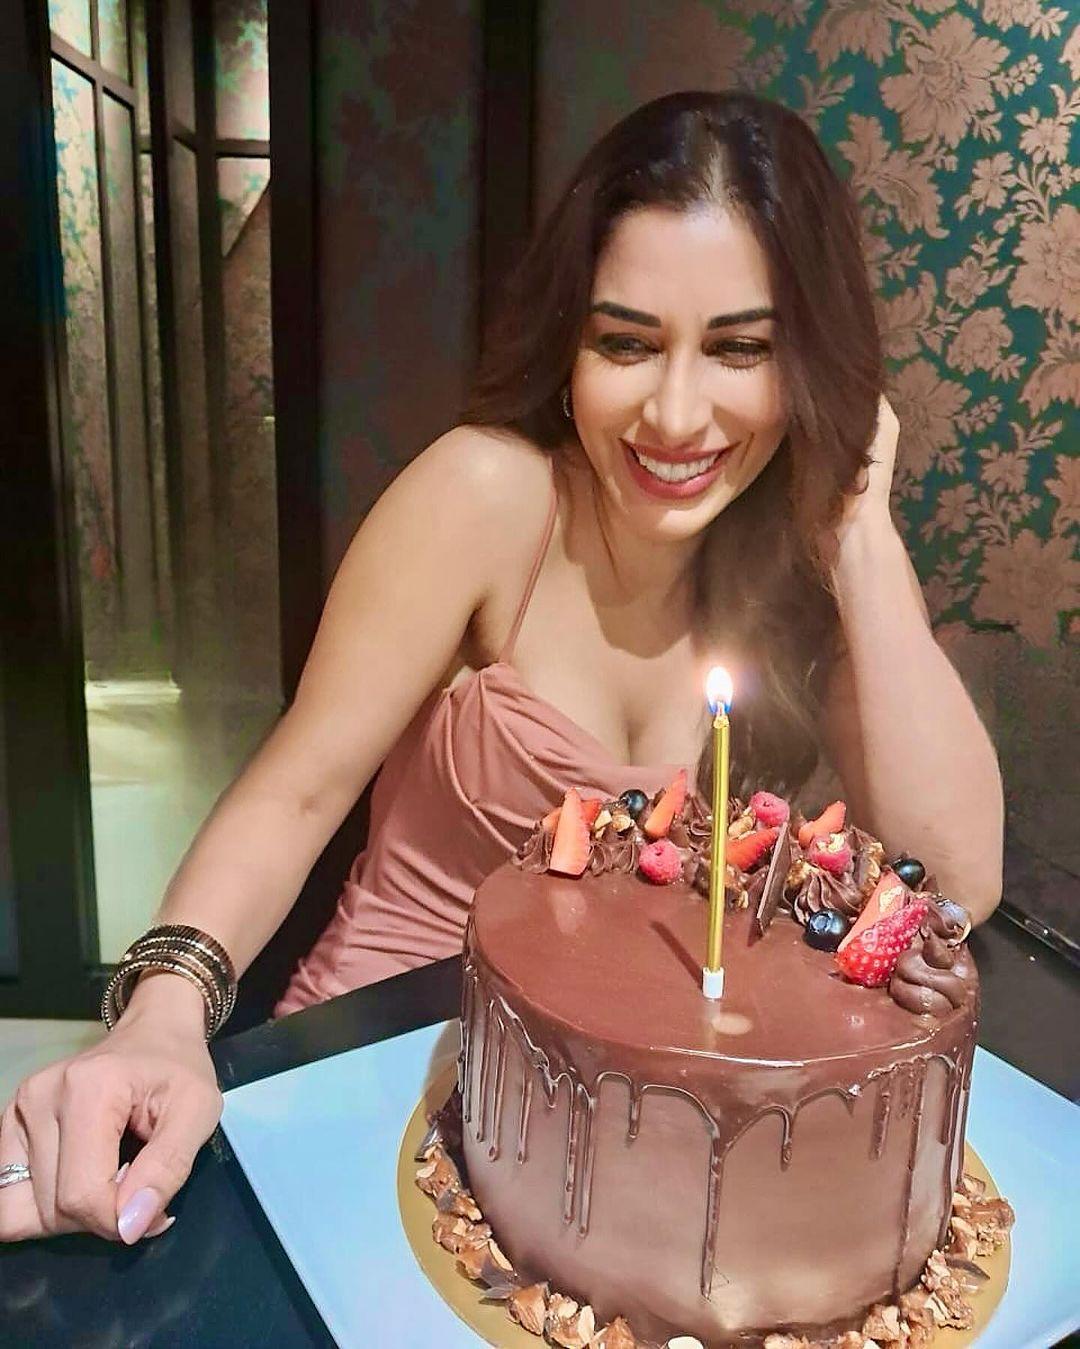 Cake, laughs and love!! Grateful for all I have and for all that is to come🎂🩷 Tku for the love everyone! #bdaygirl #reverseageing #birthdaycake #sophiechoudry #ifeelspecial #happybirthday